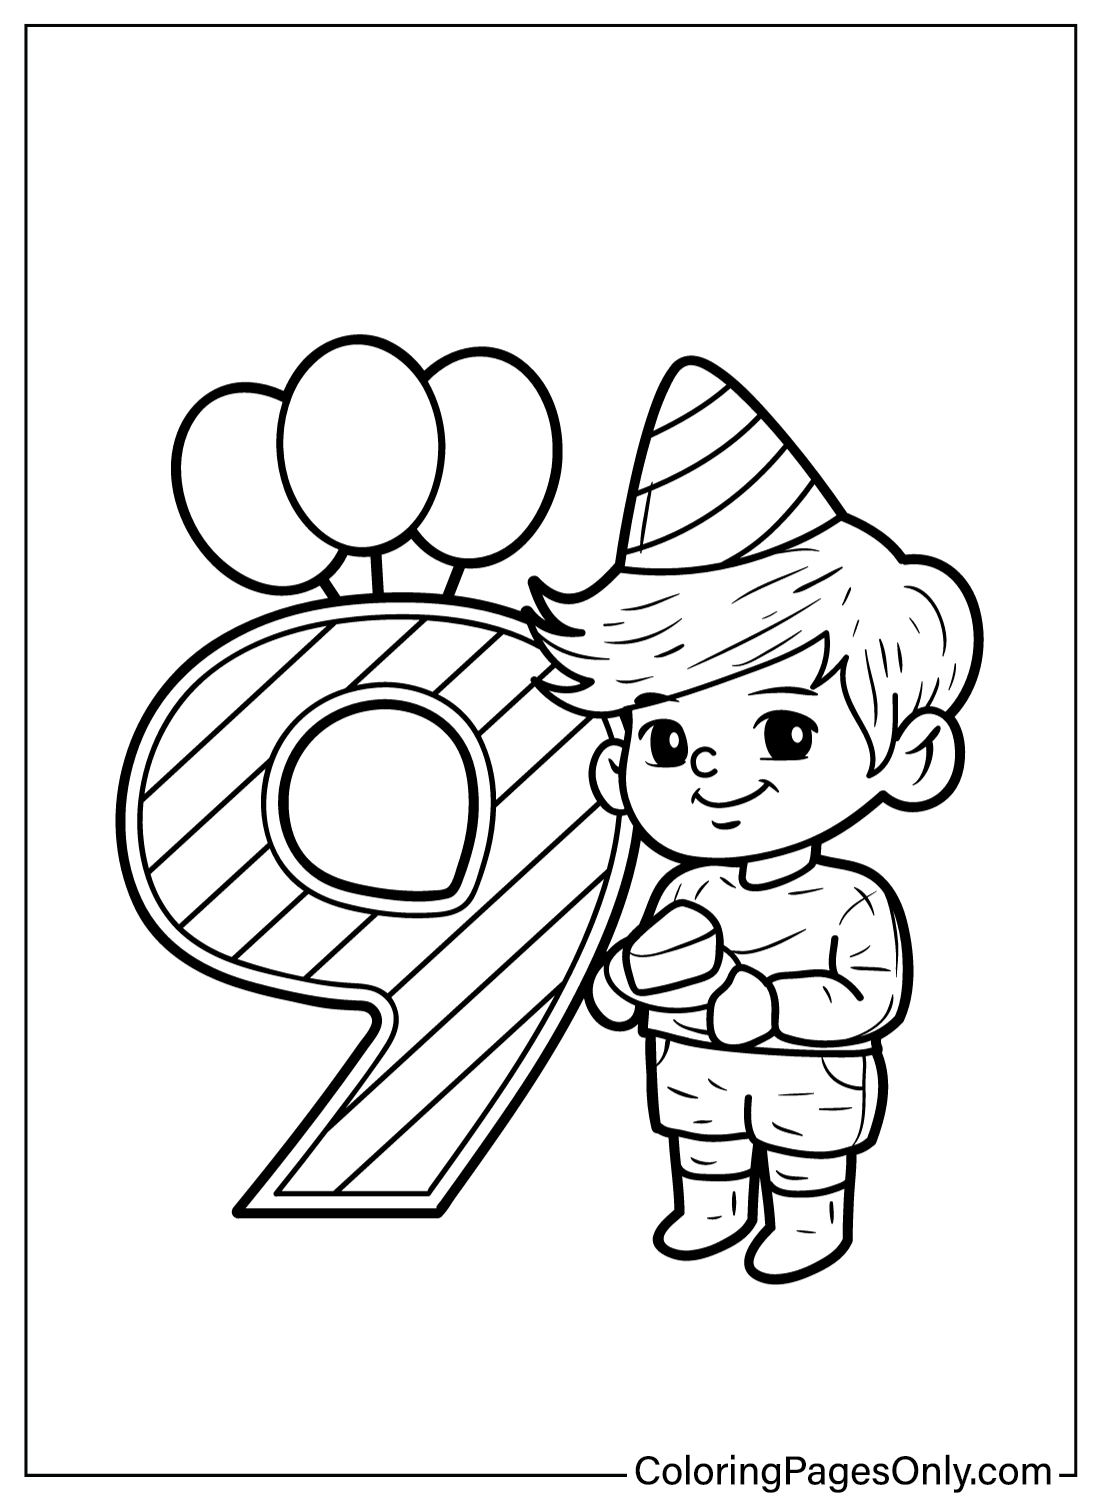 Number 9 Coloring Page